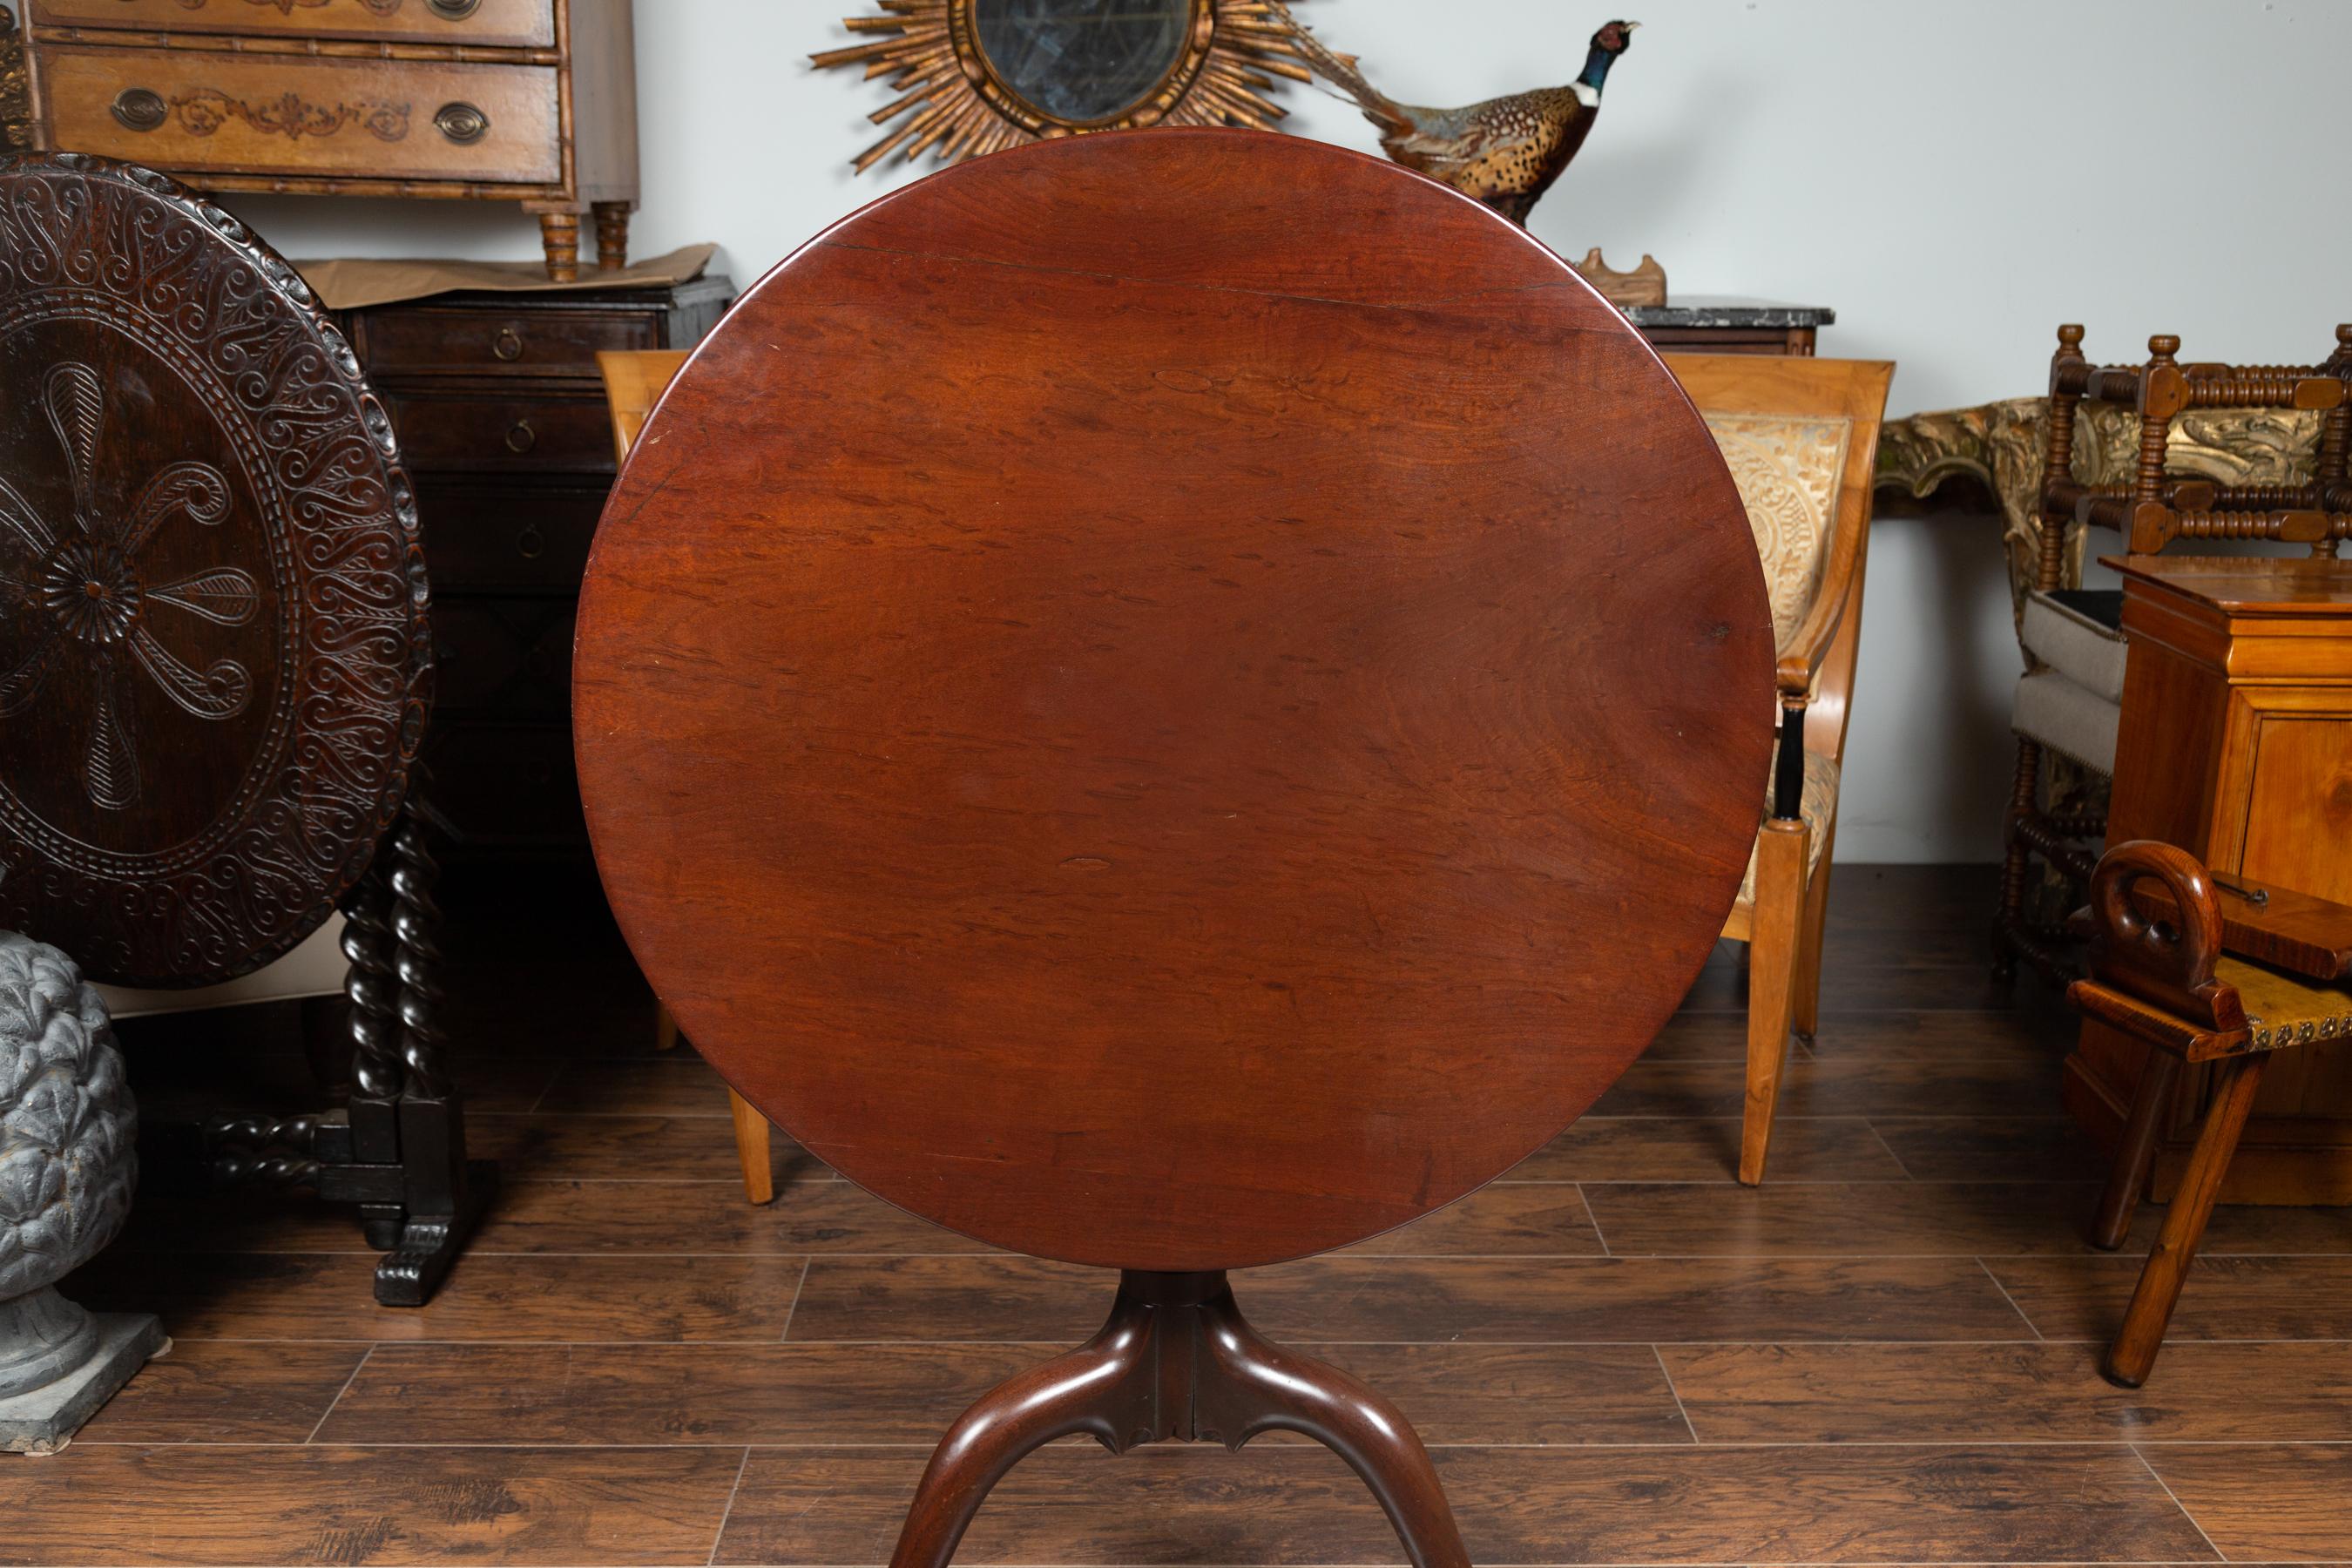 An English Georgian period mahogany tilt-top table from the early 19th century, with pedestal tripod base. Born in England during the later years of King George III's reign, this charming mahogany table features a circular tilt-top resting on a